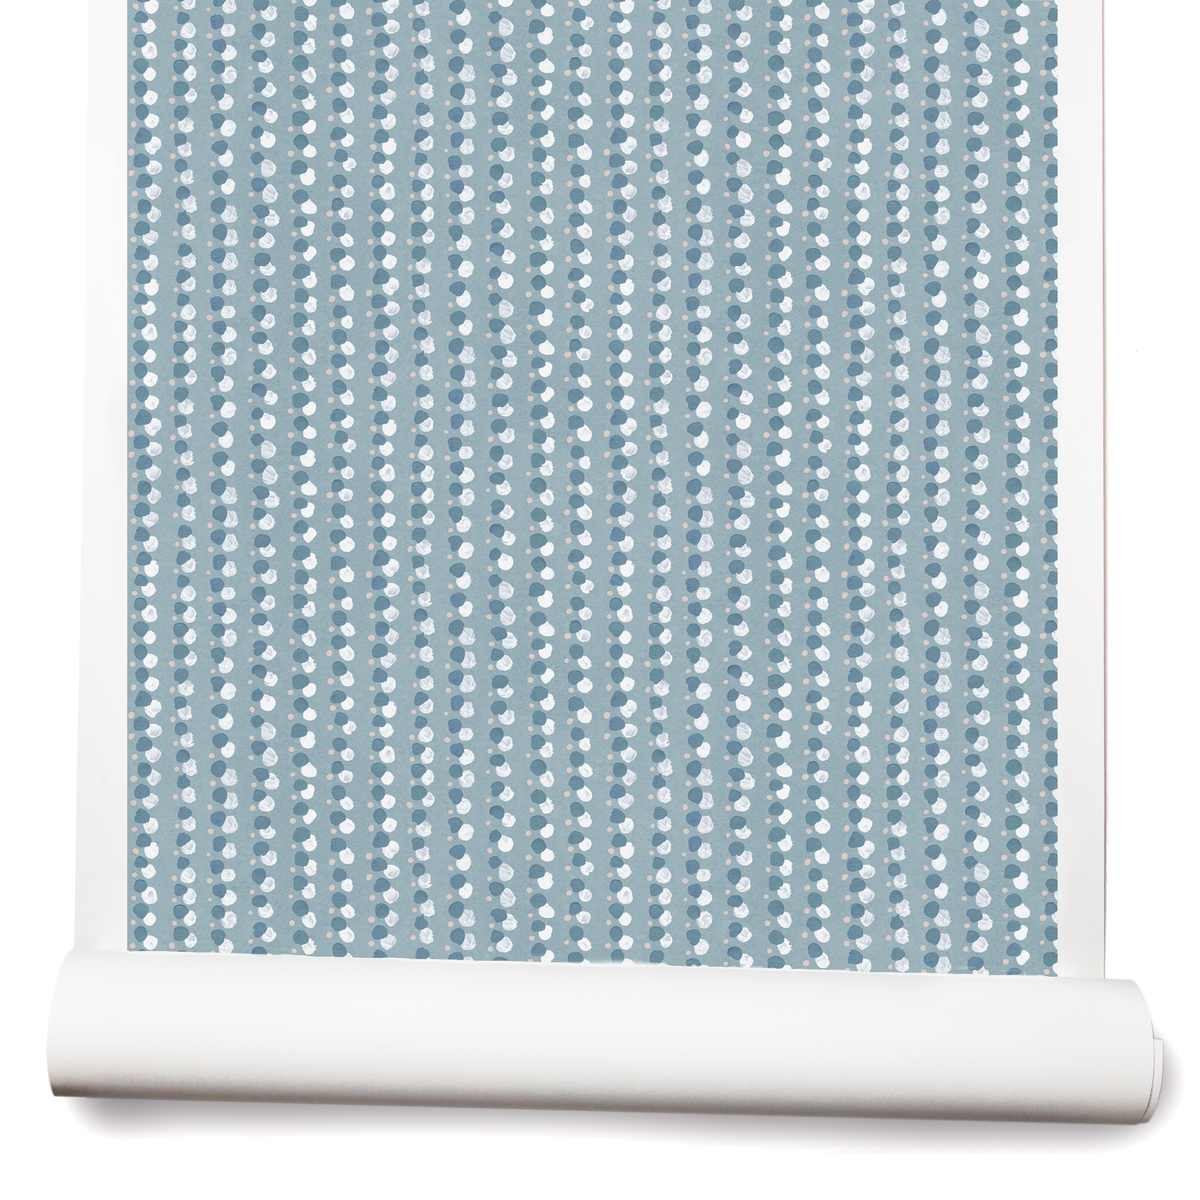 Dotted Lines Wallpaper in Light Blue